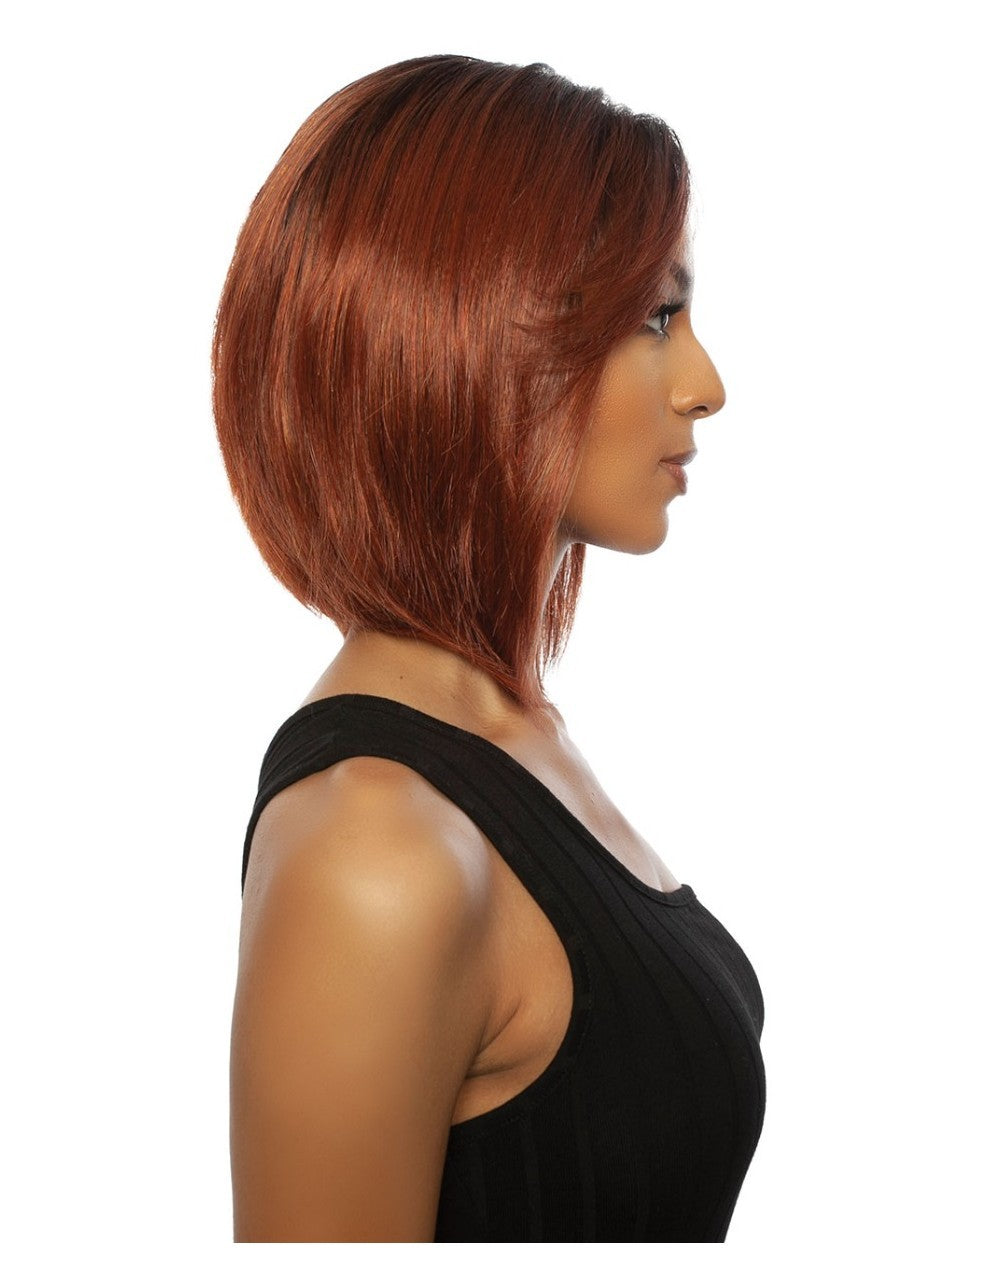 Mane Concept TRENDY Swept Bang HD Lace Front Wig RCTD207 Britt - Elevate Styles